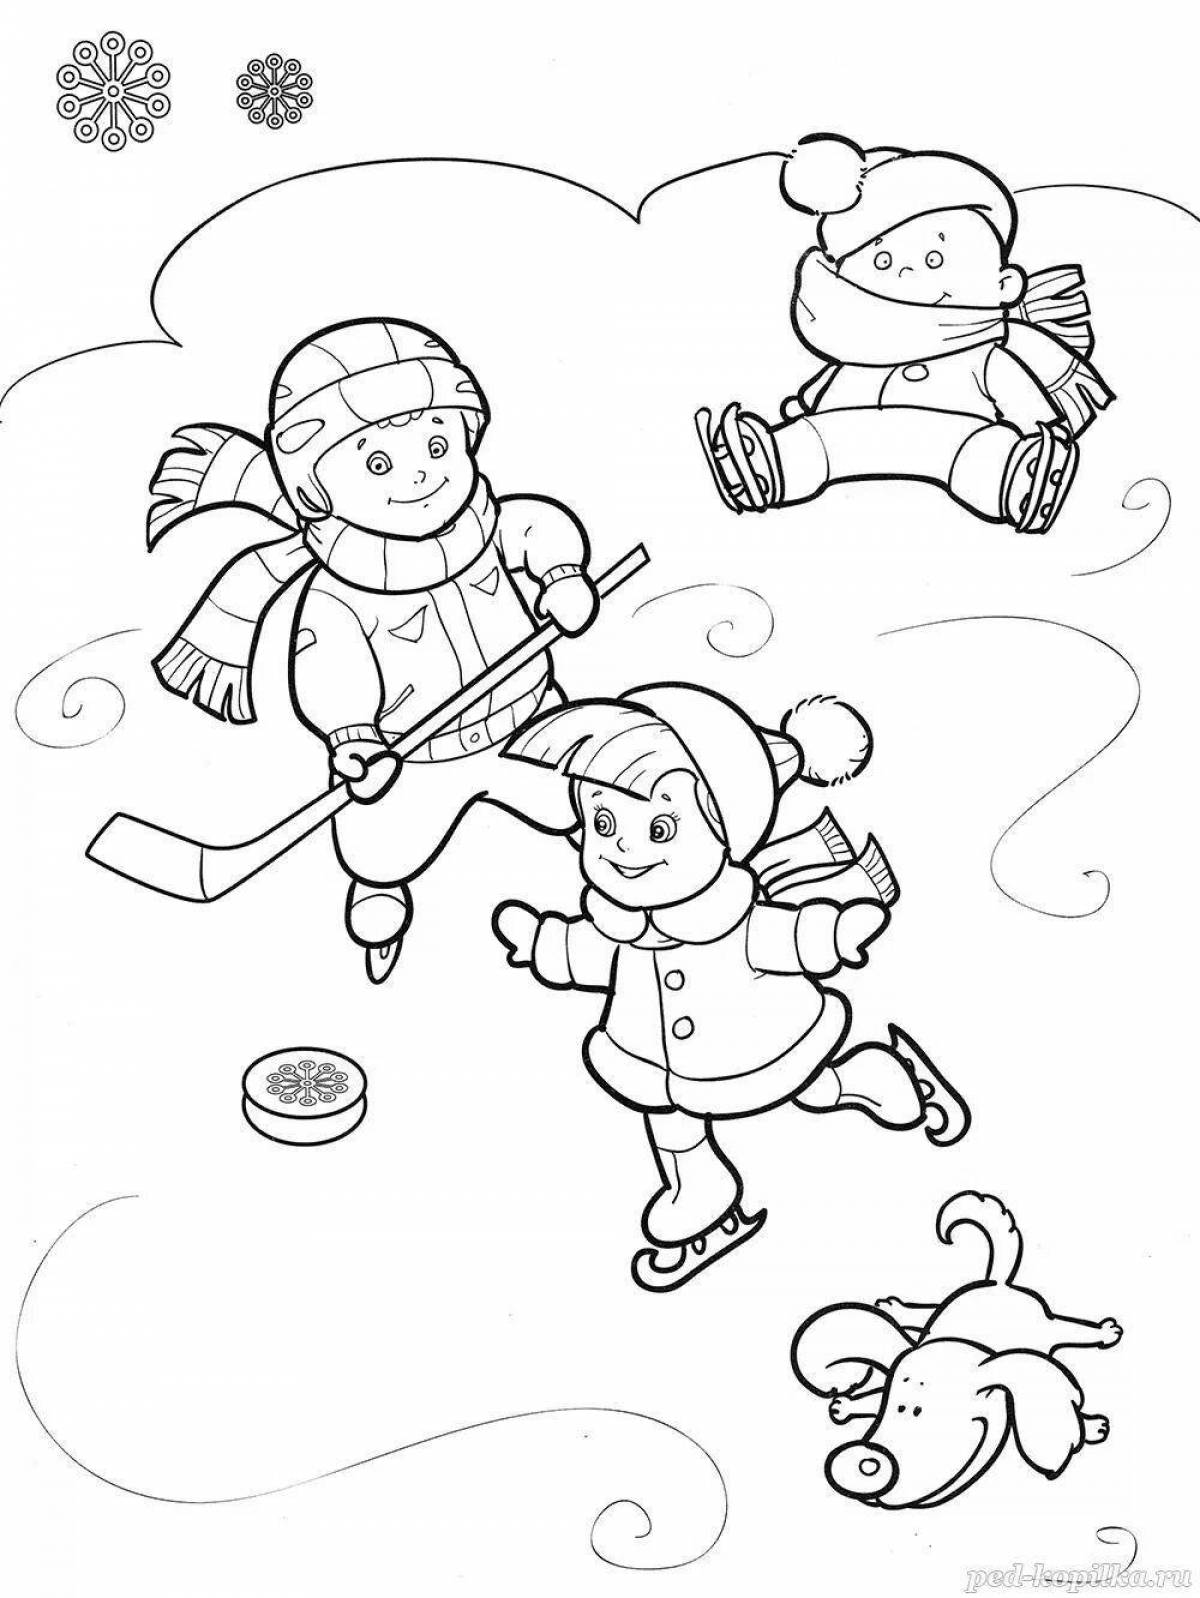 Exquisite winter sports coloring book for kids